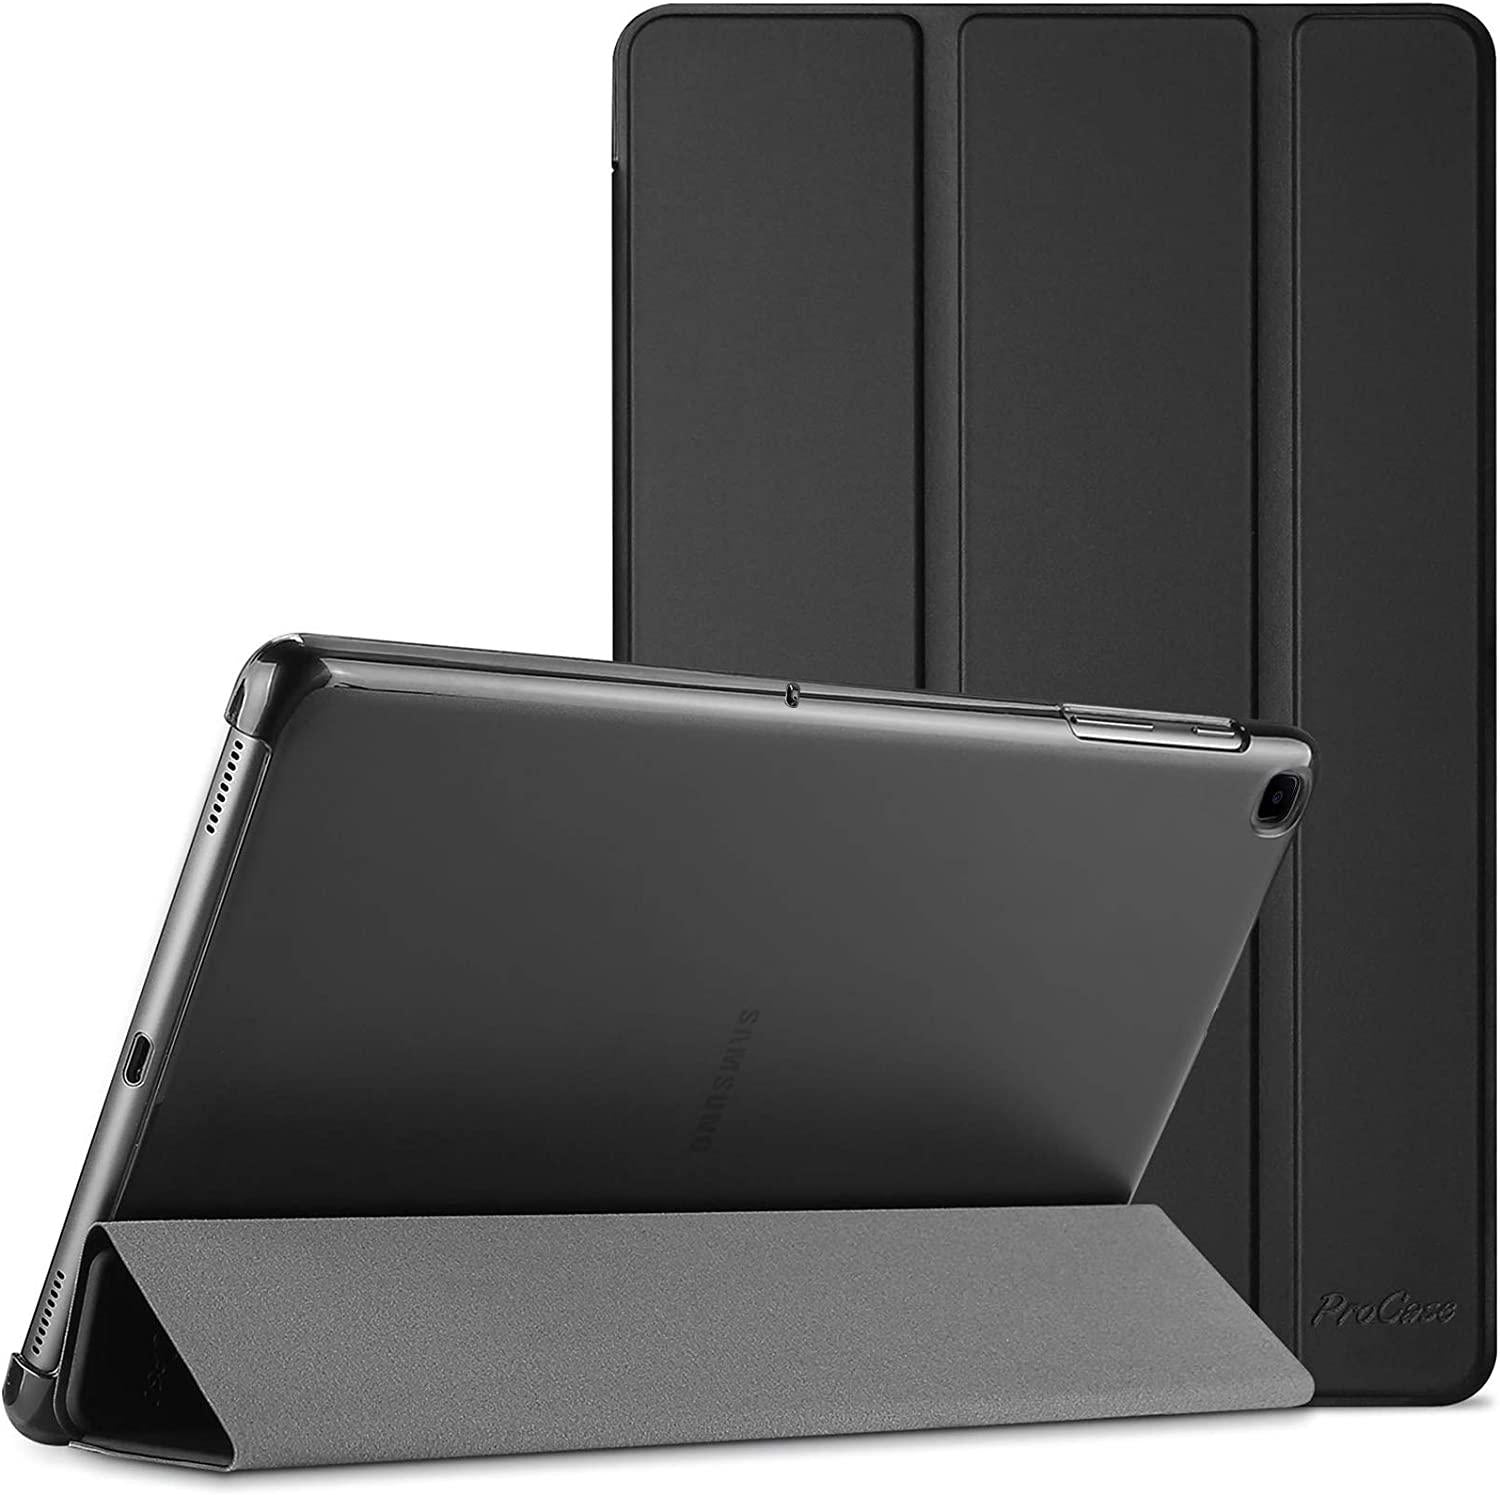 Procase, ProCase Galaxy Tab A7 Case 10.4 Inch (SM-T500 T503 T505 T507), Protective Stand Case Hard Shell Cover for 10.4 Inch Samsung Tab A7 Tablet 2020 -Black